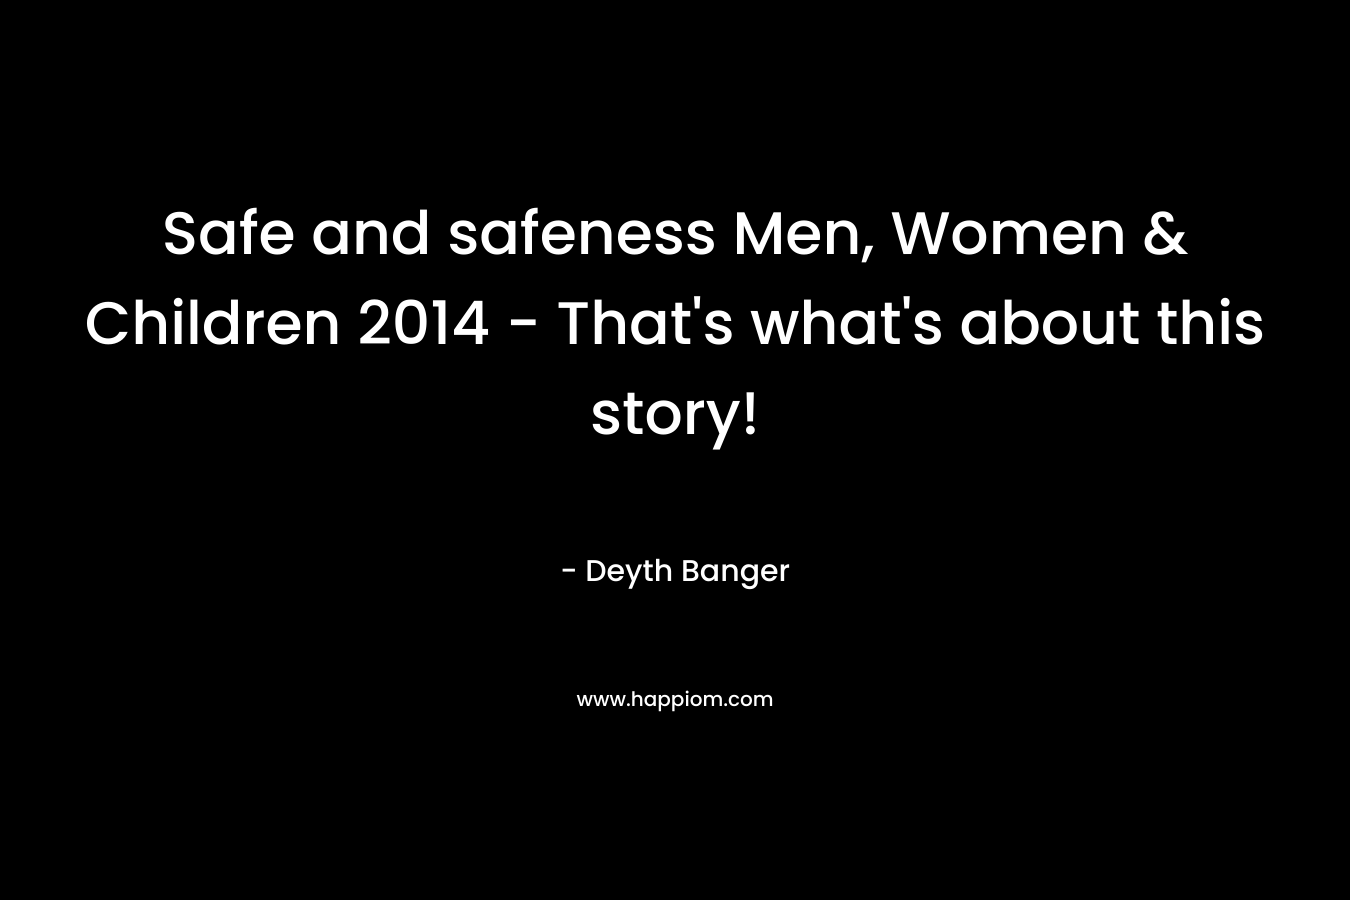 Safe and safeness Men, Women & Children 2014 - That's what's about this story!